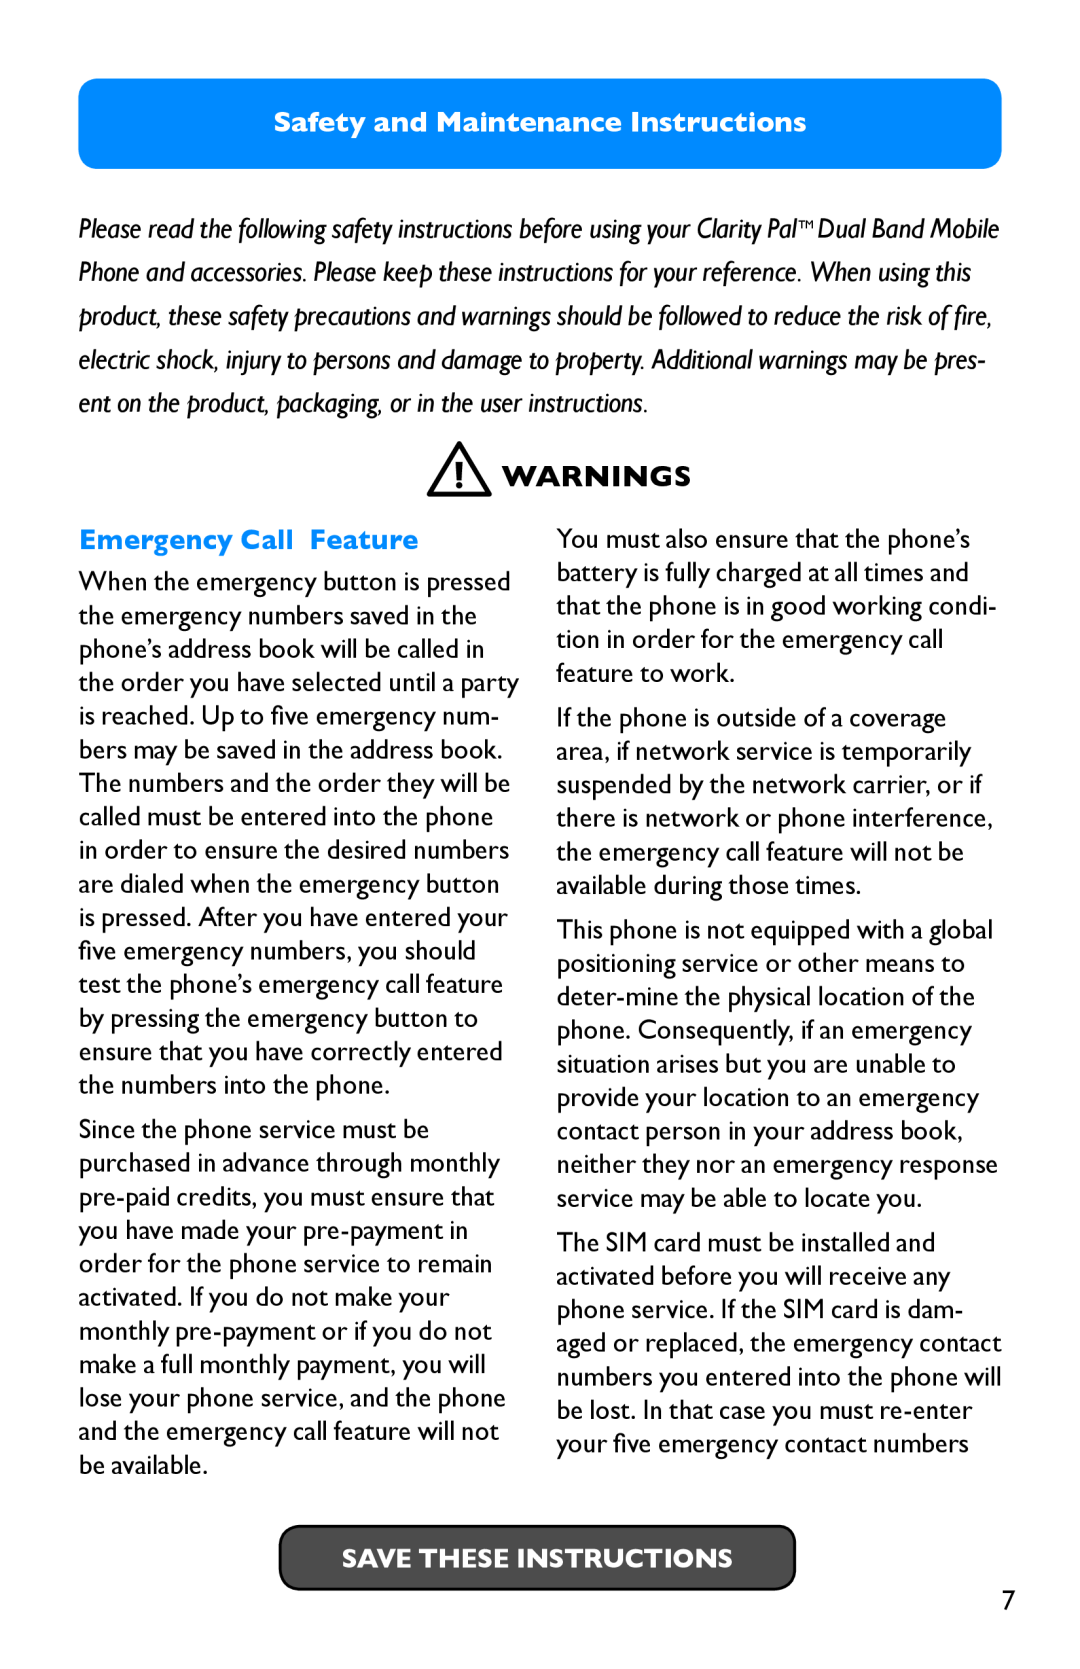 Clarity Pal manual Safety and Maintenance Instructions, Emergency Call Feature, Save These Instructions, Warnings 